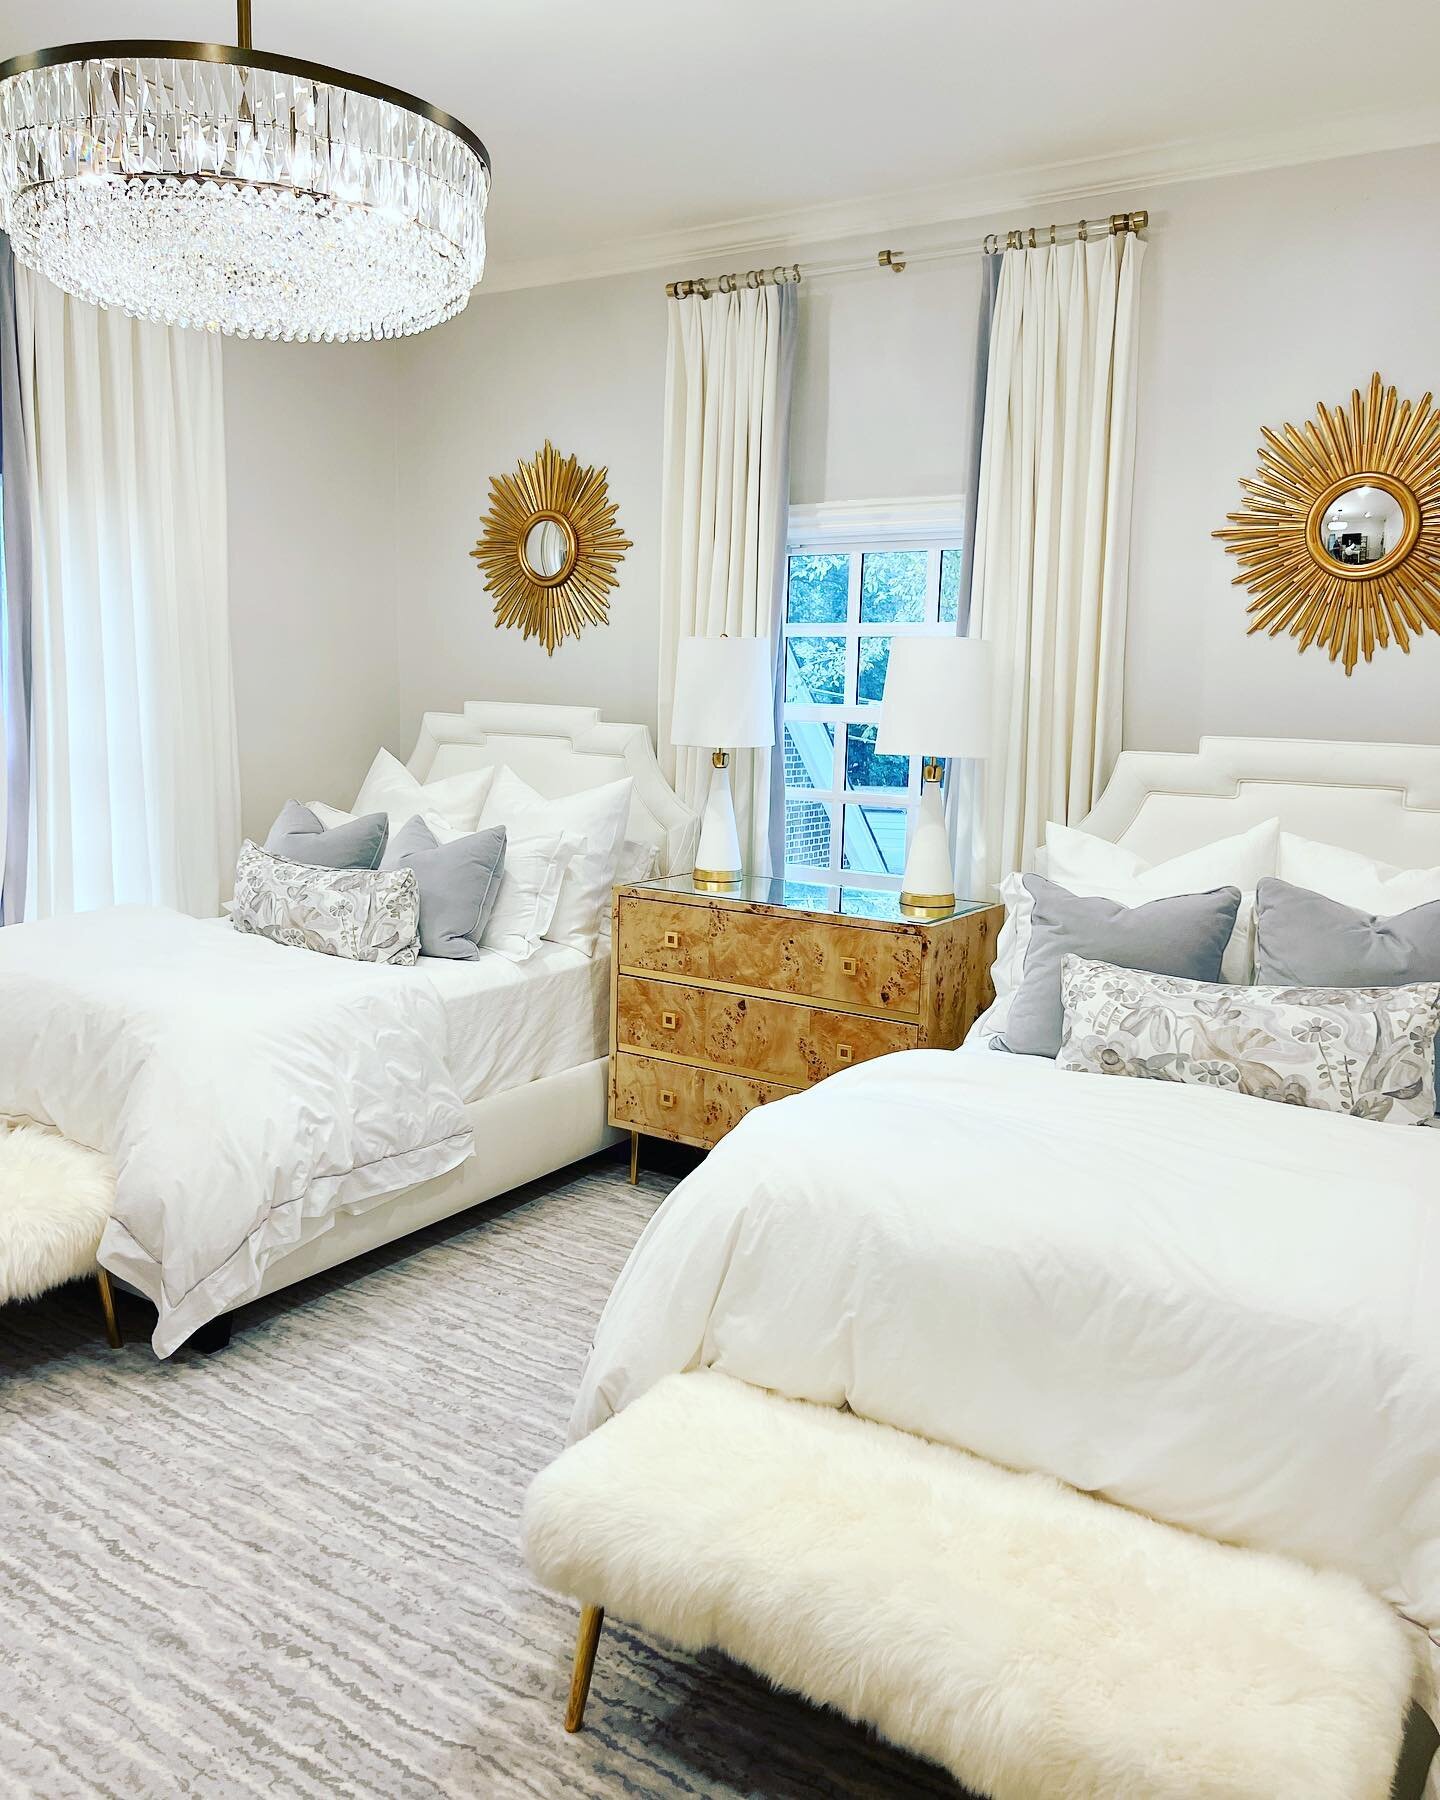 ✨ g u e s t ✨
Is your guest room ready for company? Get everything in top shape in time for the holidays! We can help 💫